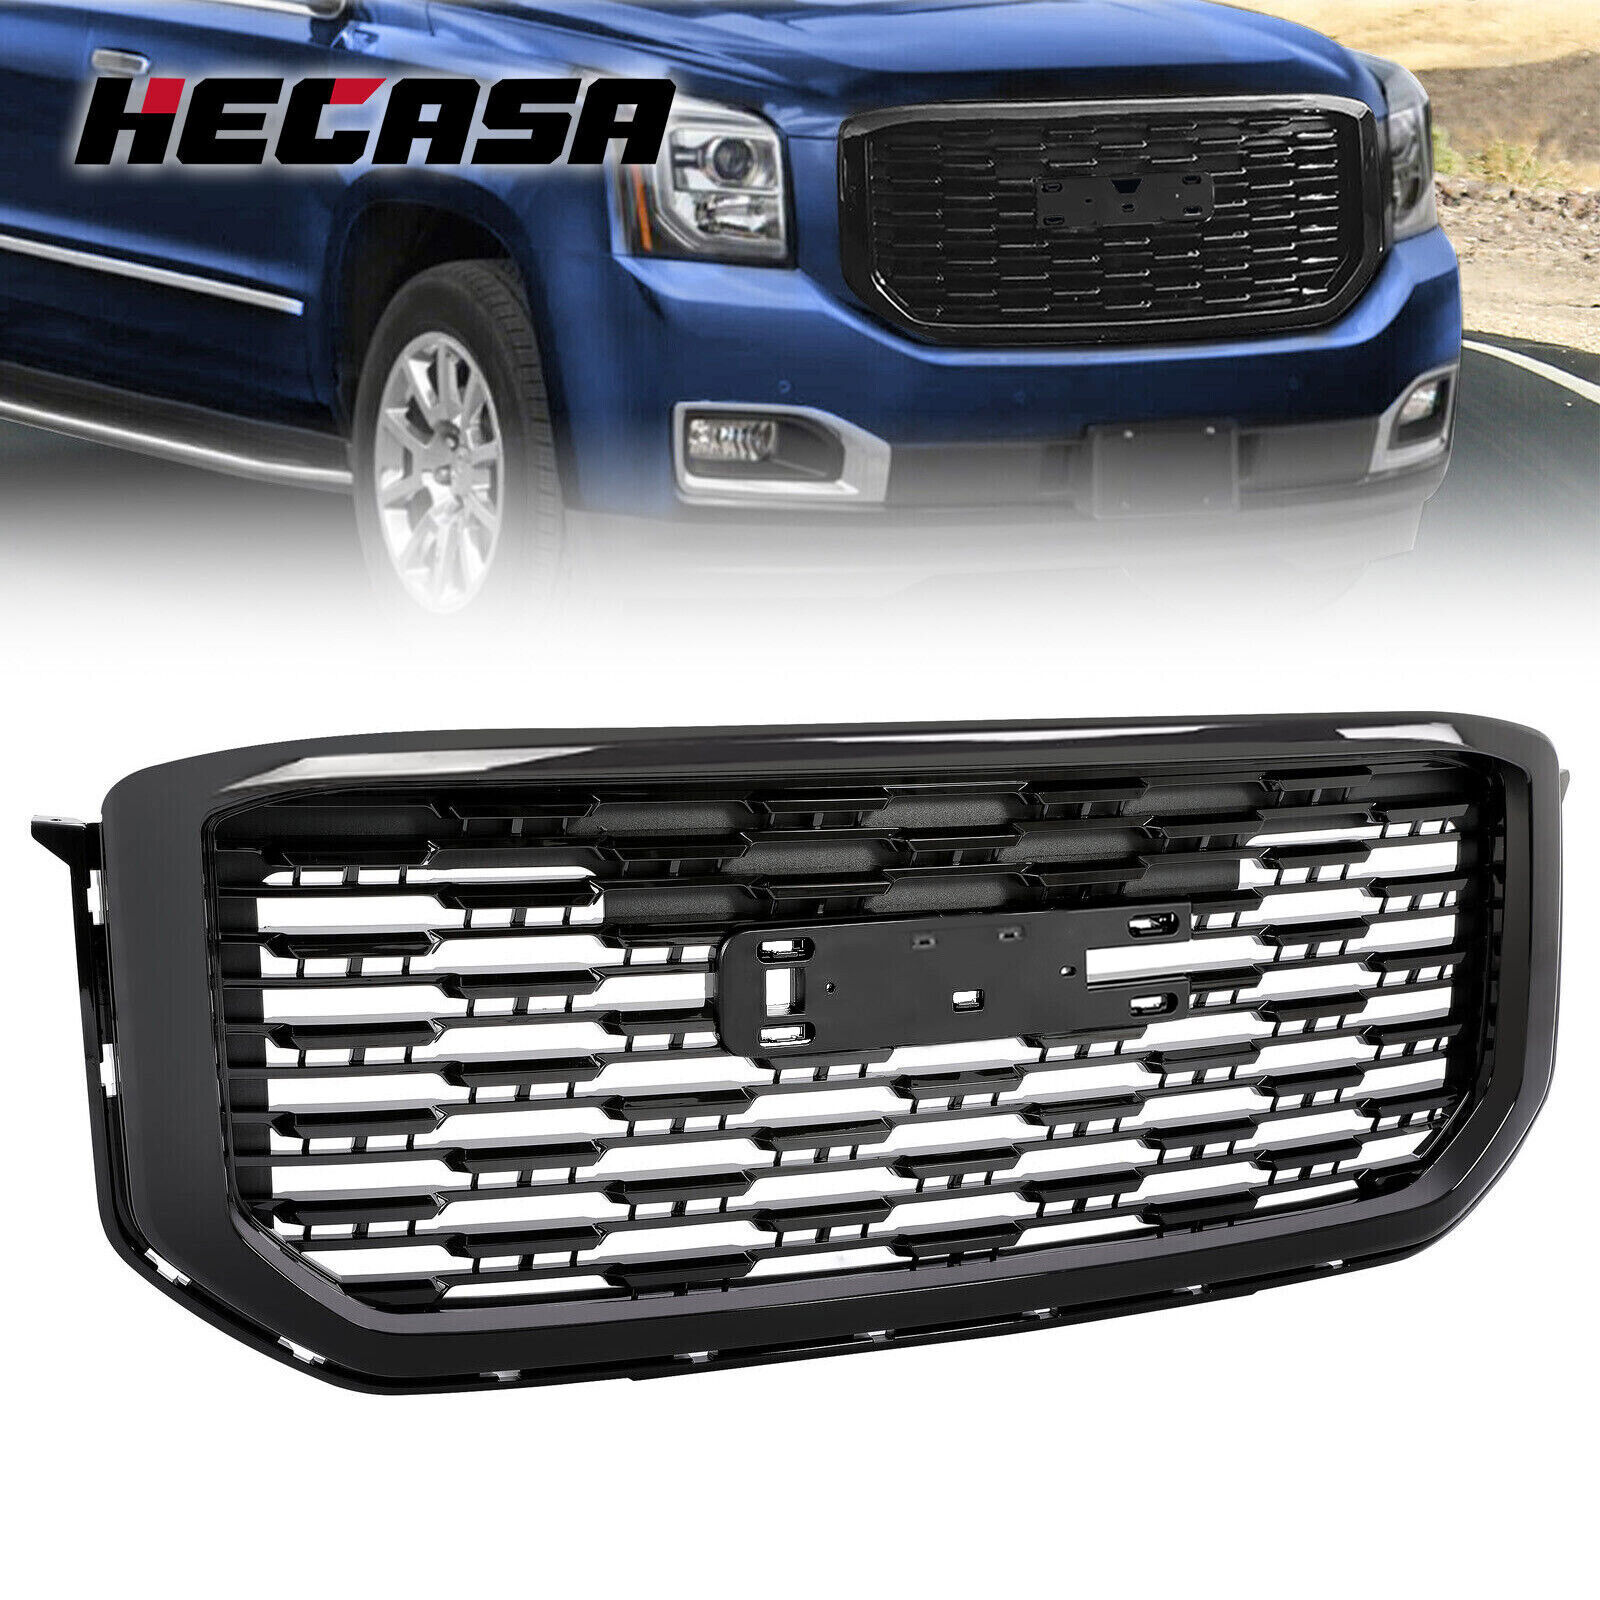 Glossy Black Denali Style Front Bumper Grille Grill For 2015-2020 GMC Yukon XL